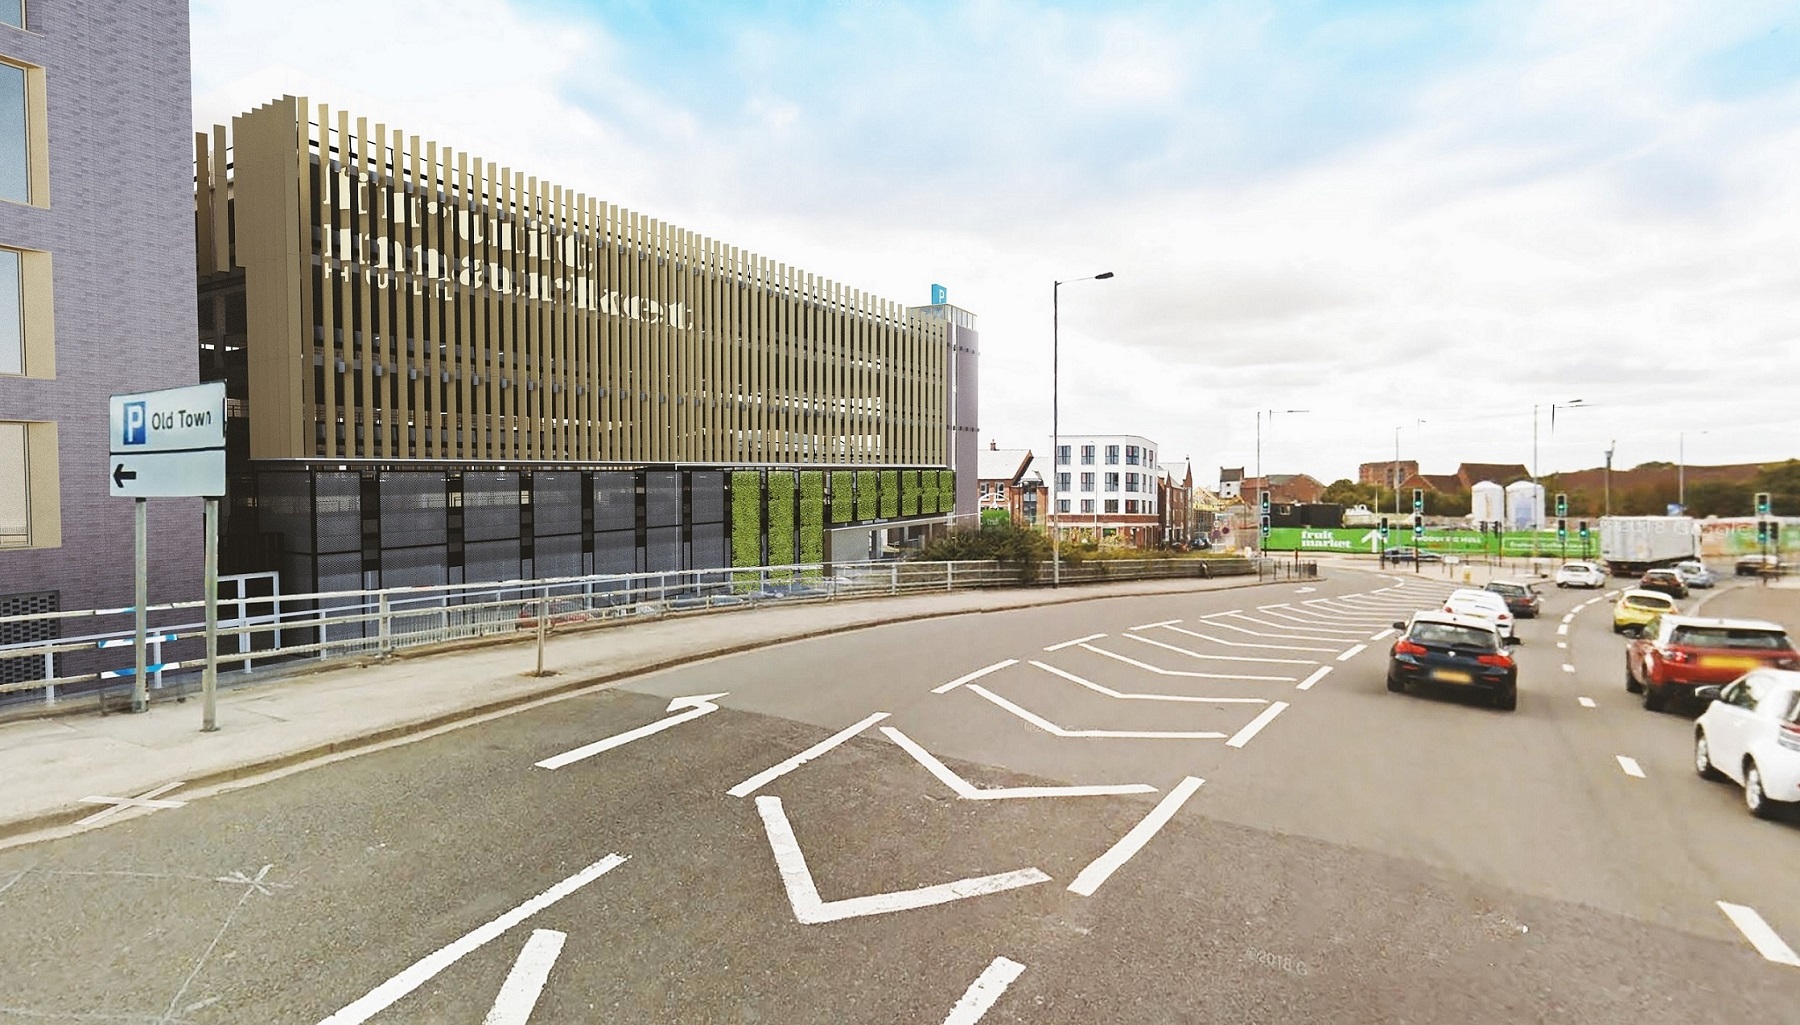 How the 350-space multi-storey car park will look